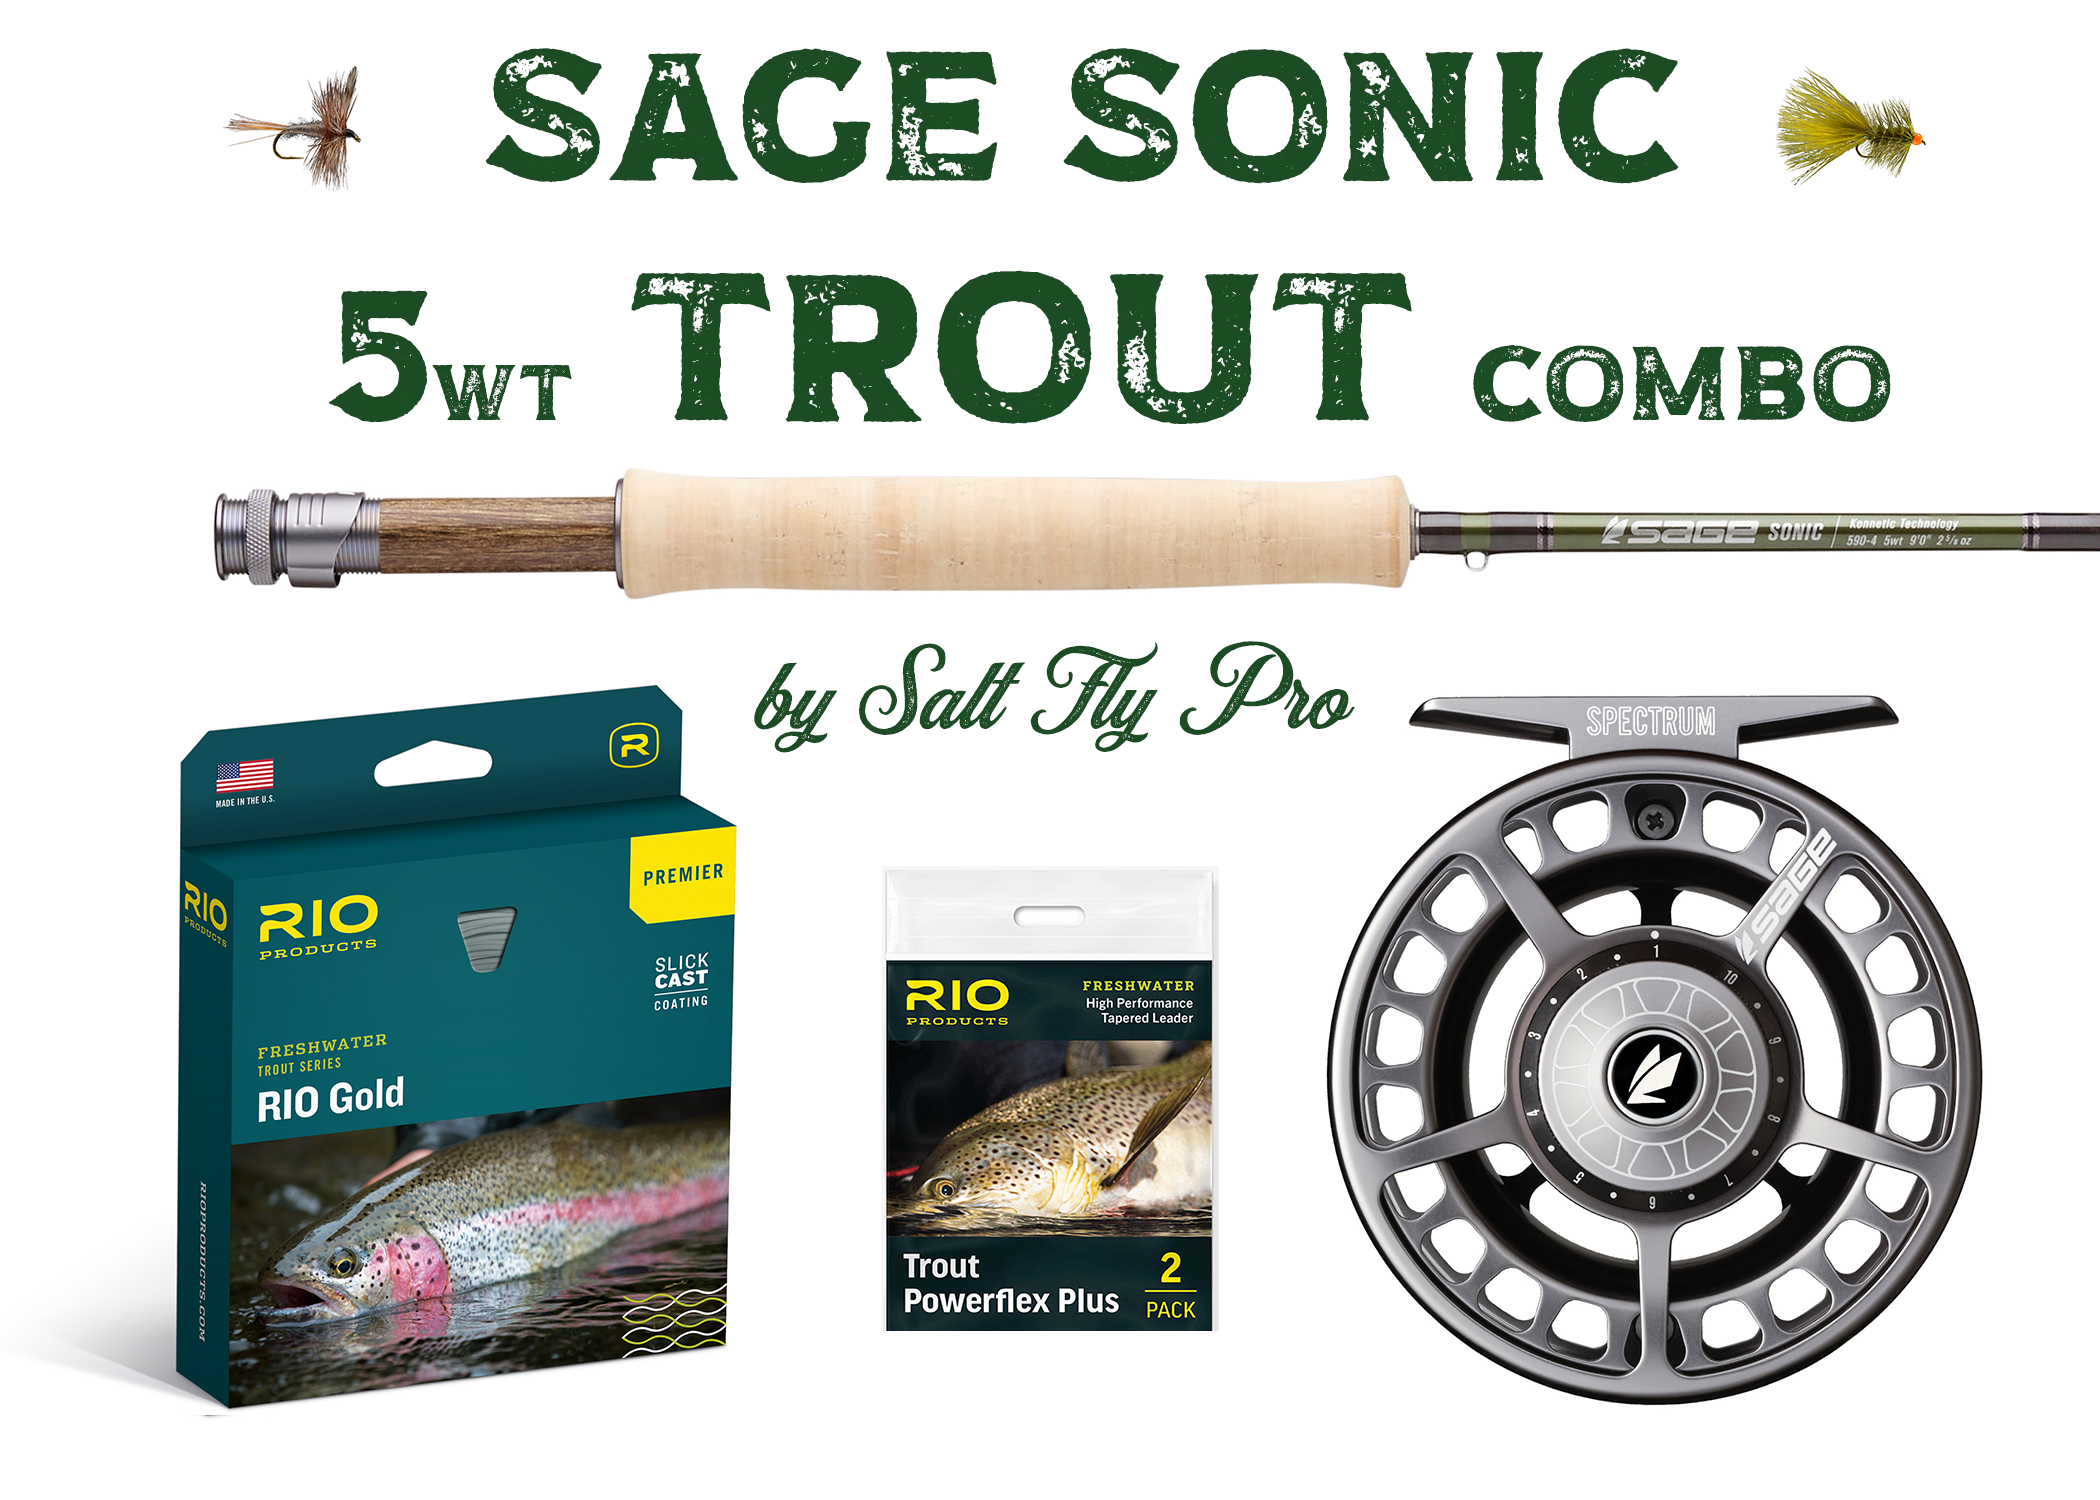 Sage SONIC 5wt Trout Combo Outfit - NEW!